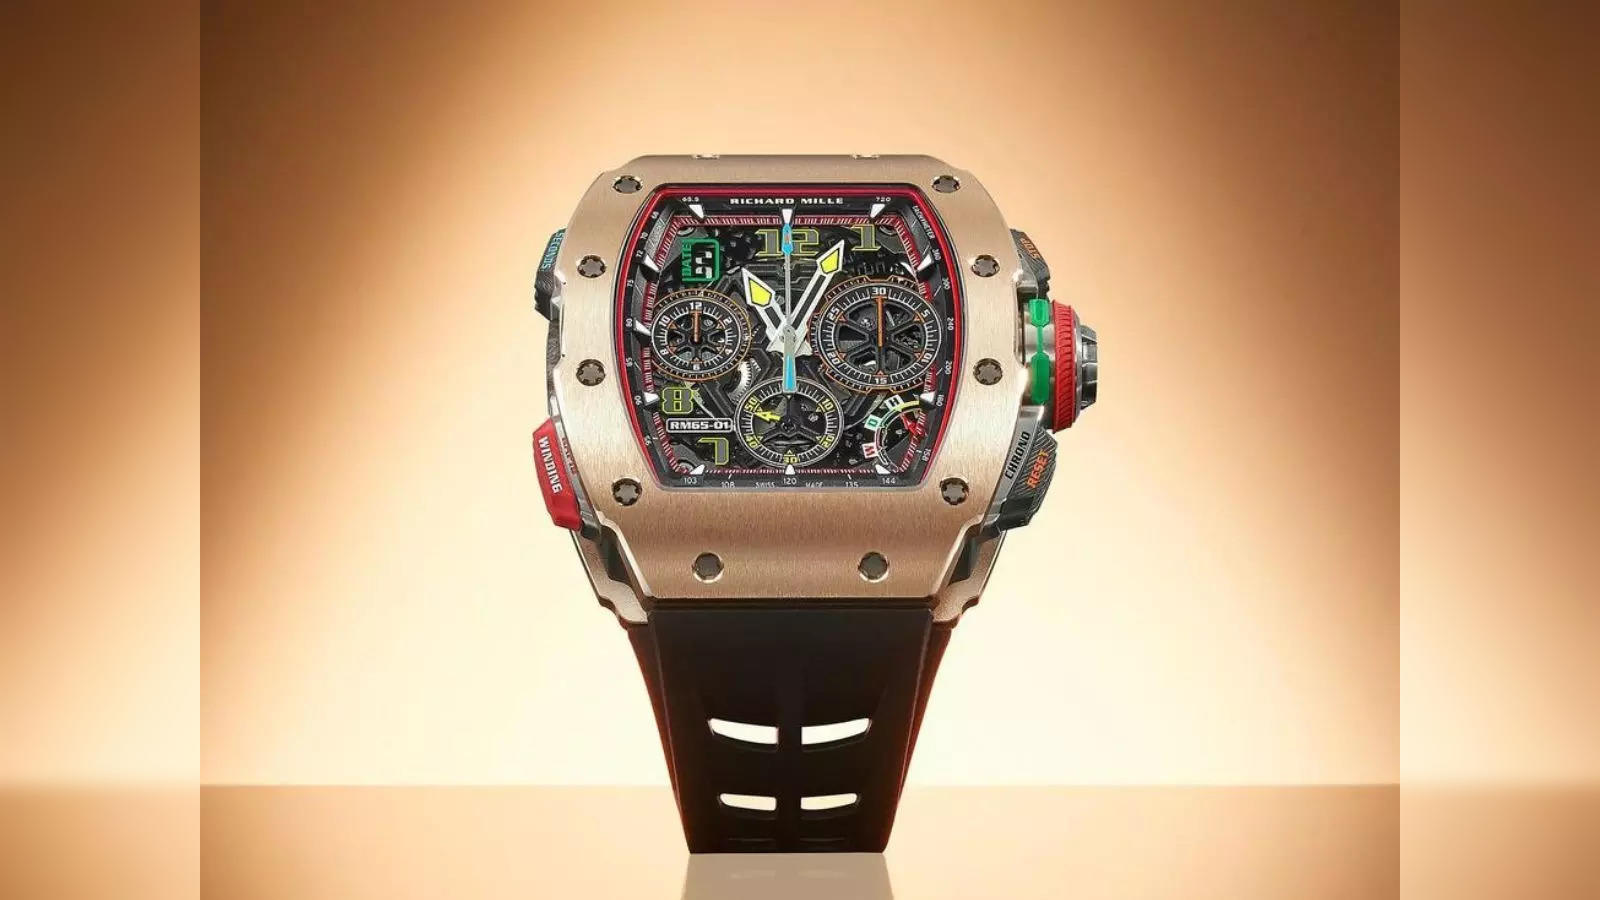 Richard Mille watches: The Richard Mille phenomenon: How this watch brand  established a successful legacy in 2 decades - The Economic Times